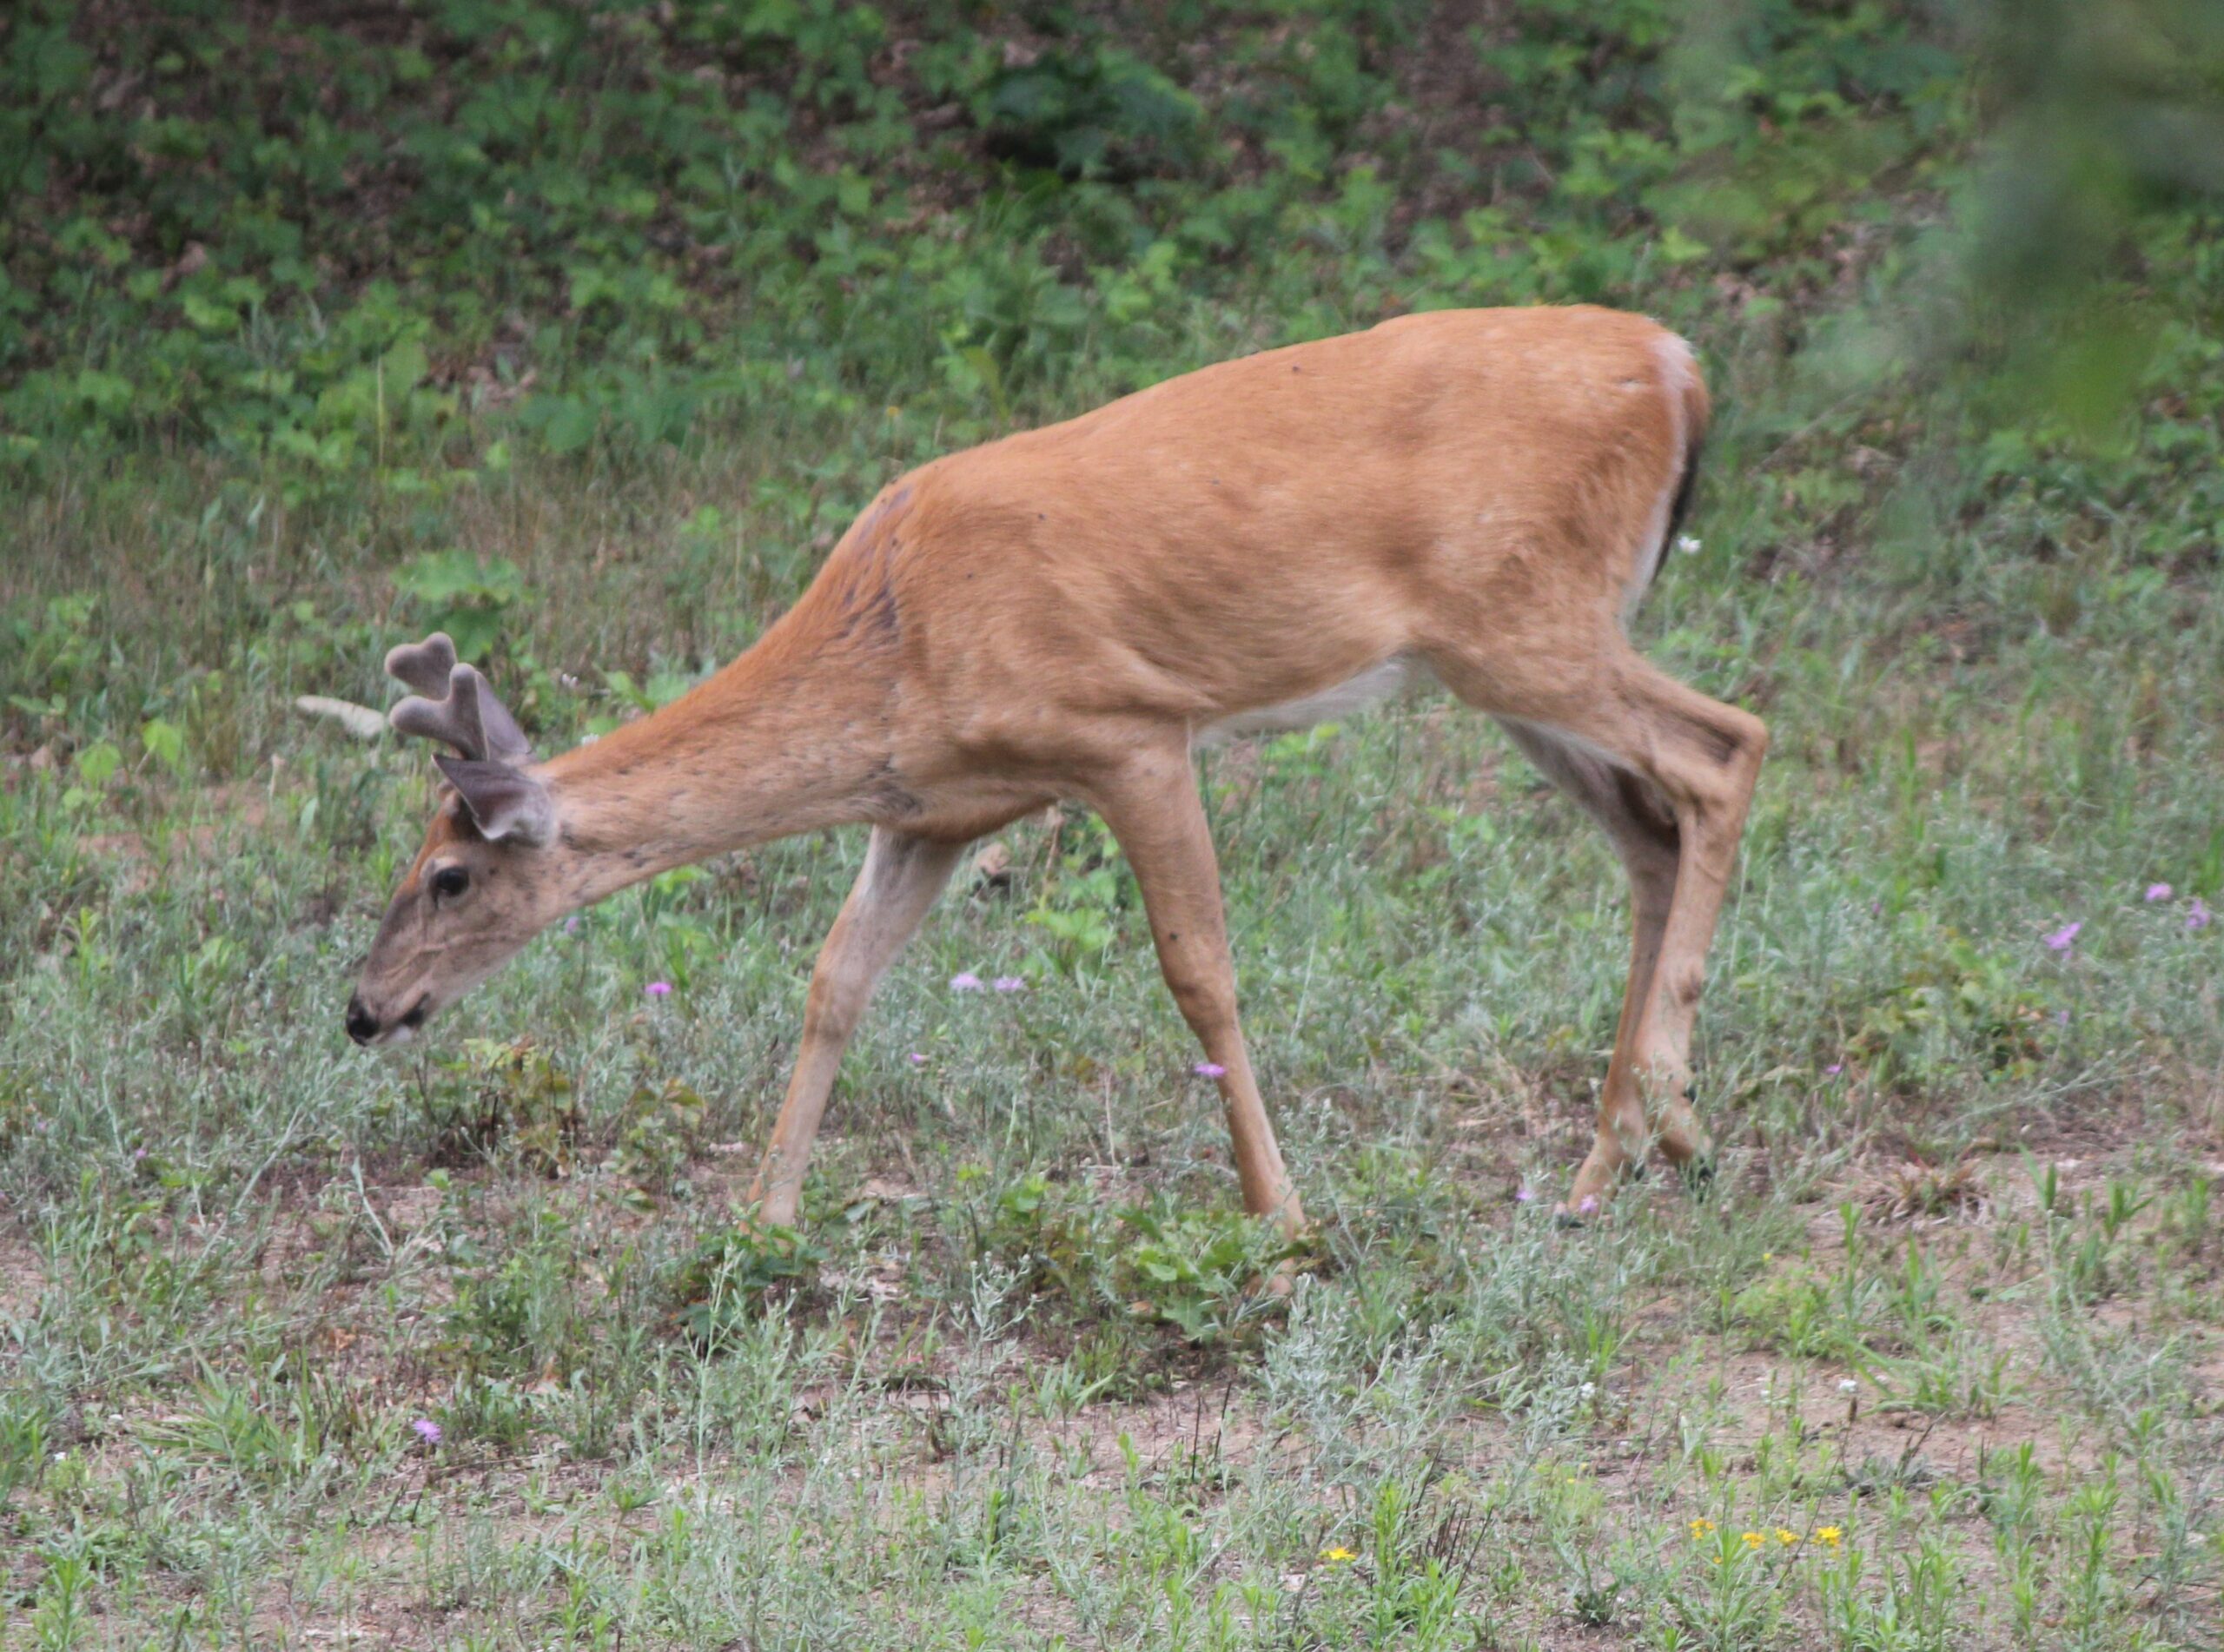 A photo of a deer on the move